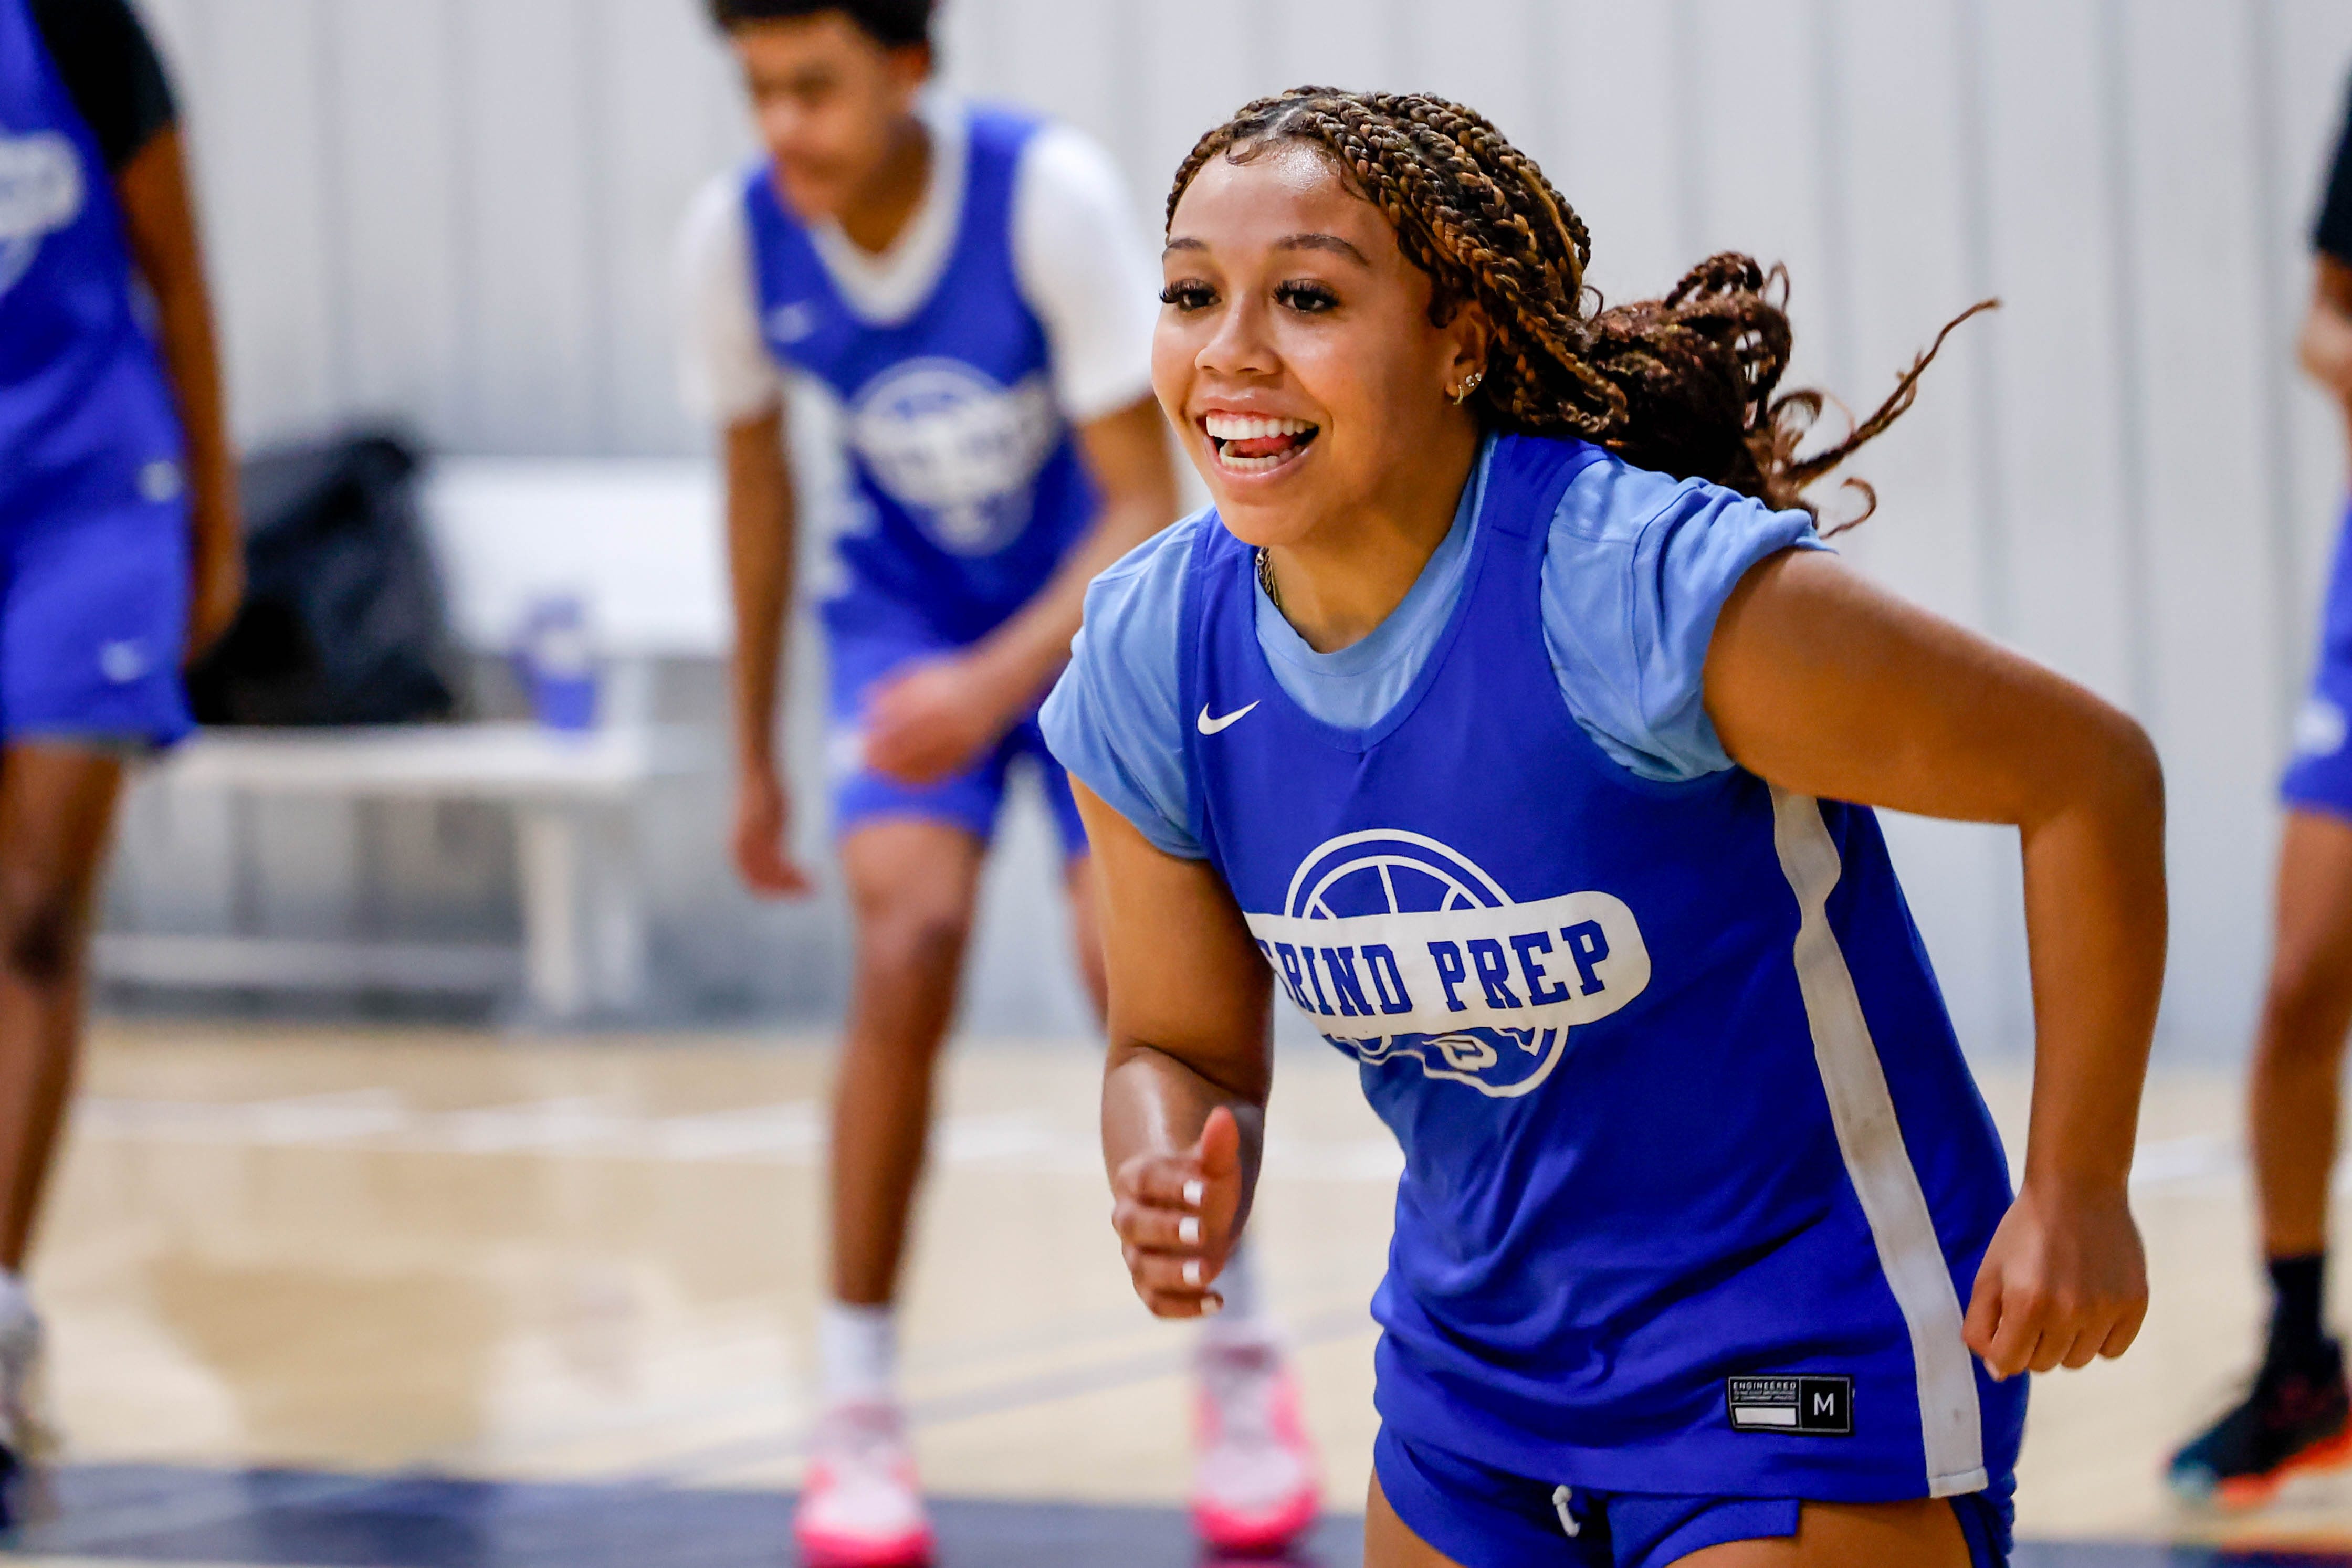 Who are the athletes? Meet the faces of Grind Prep Academy